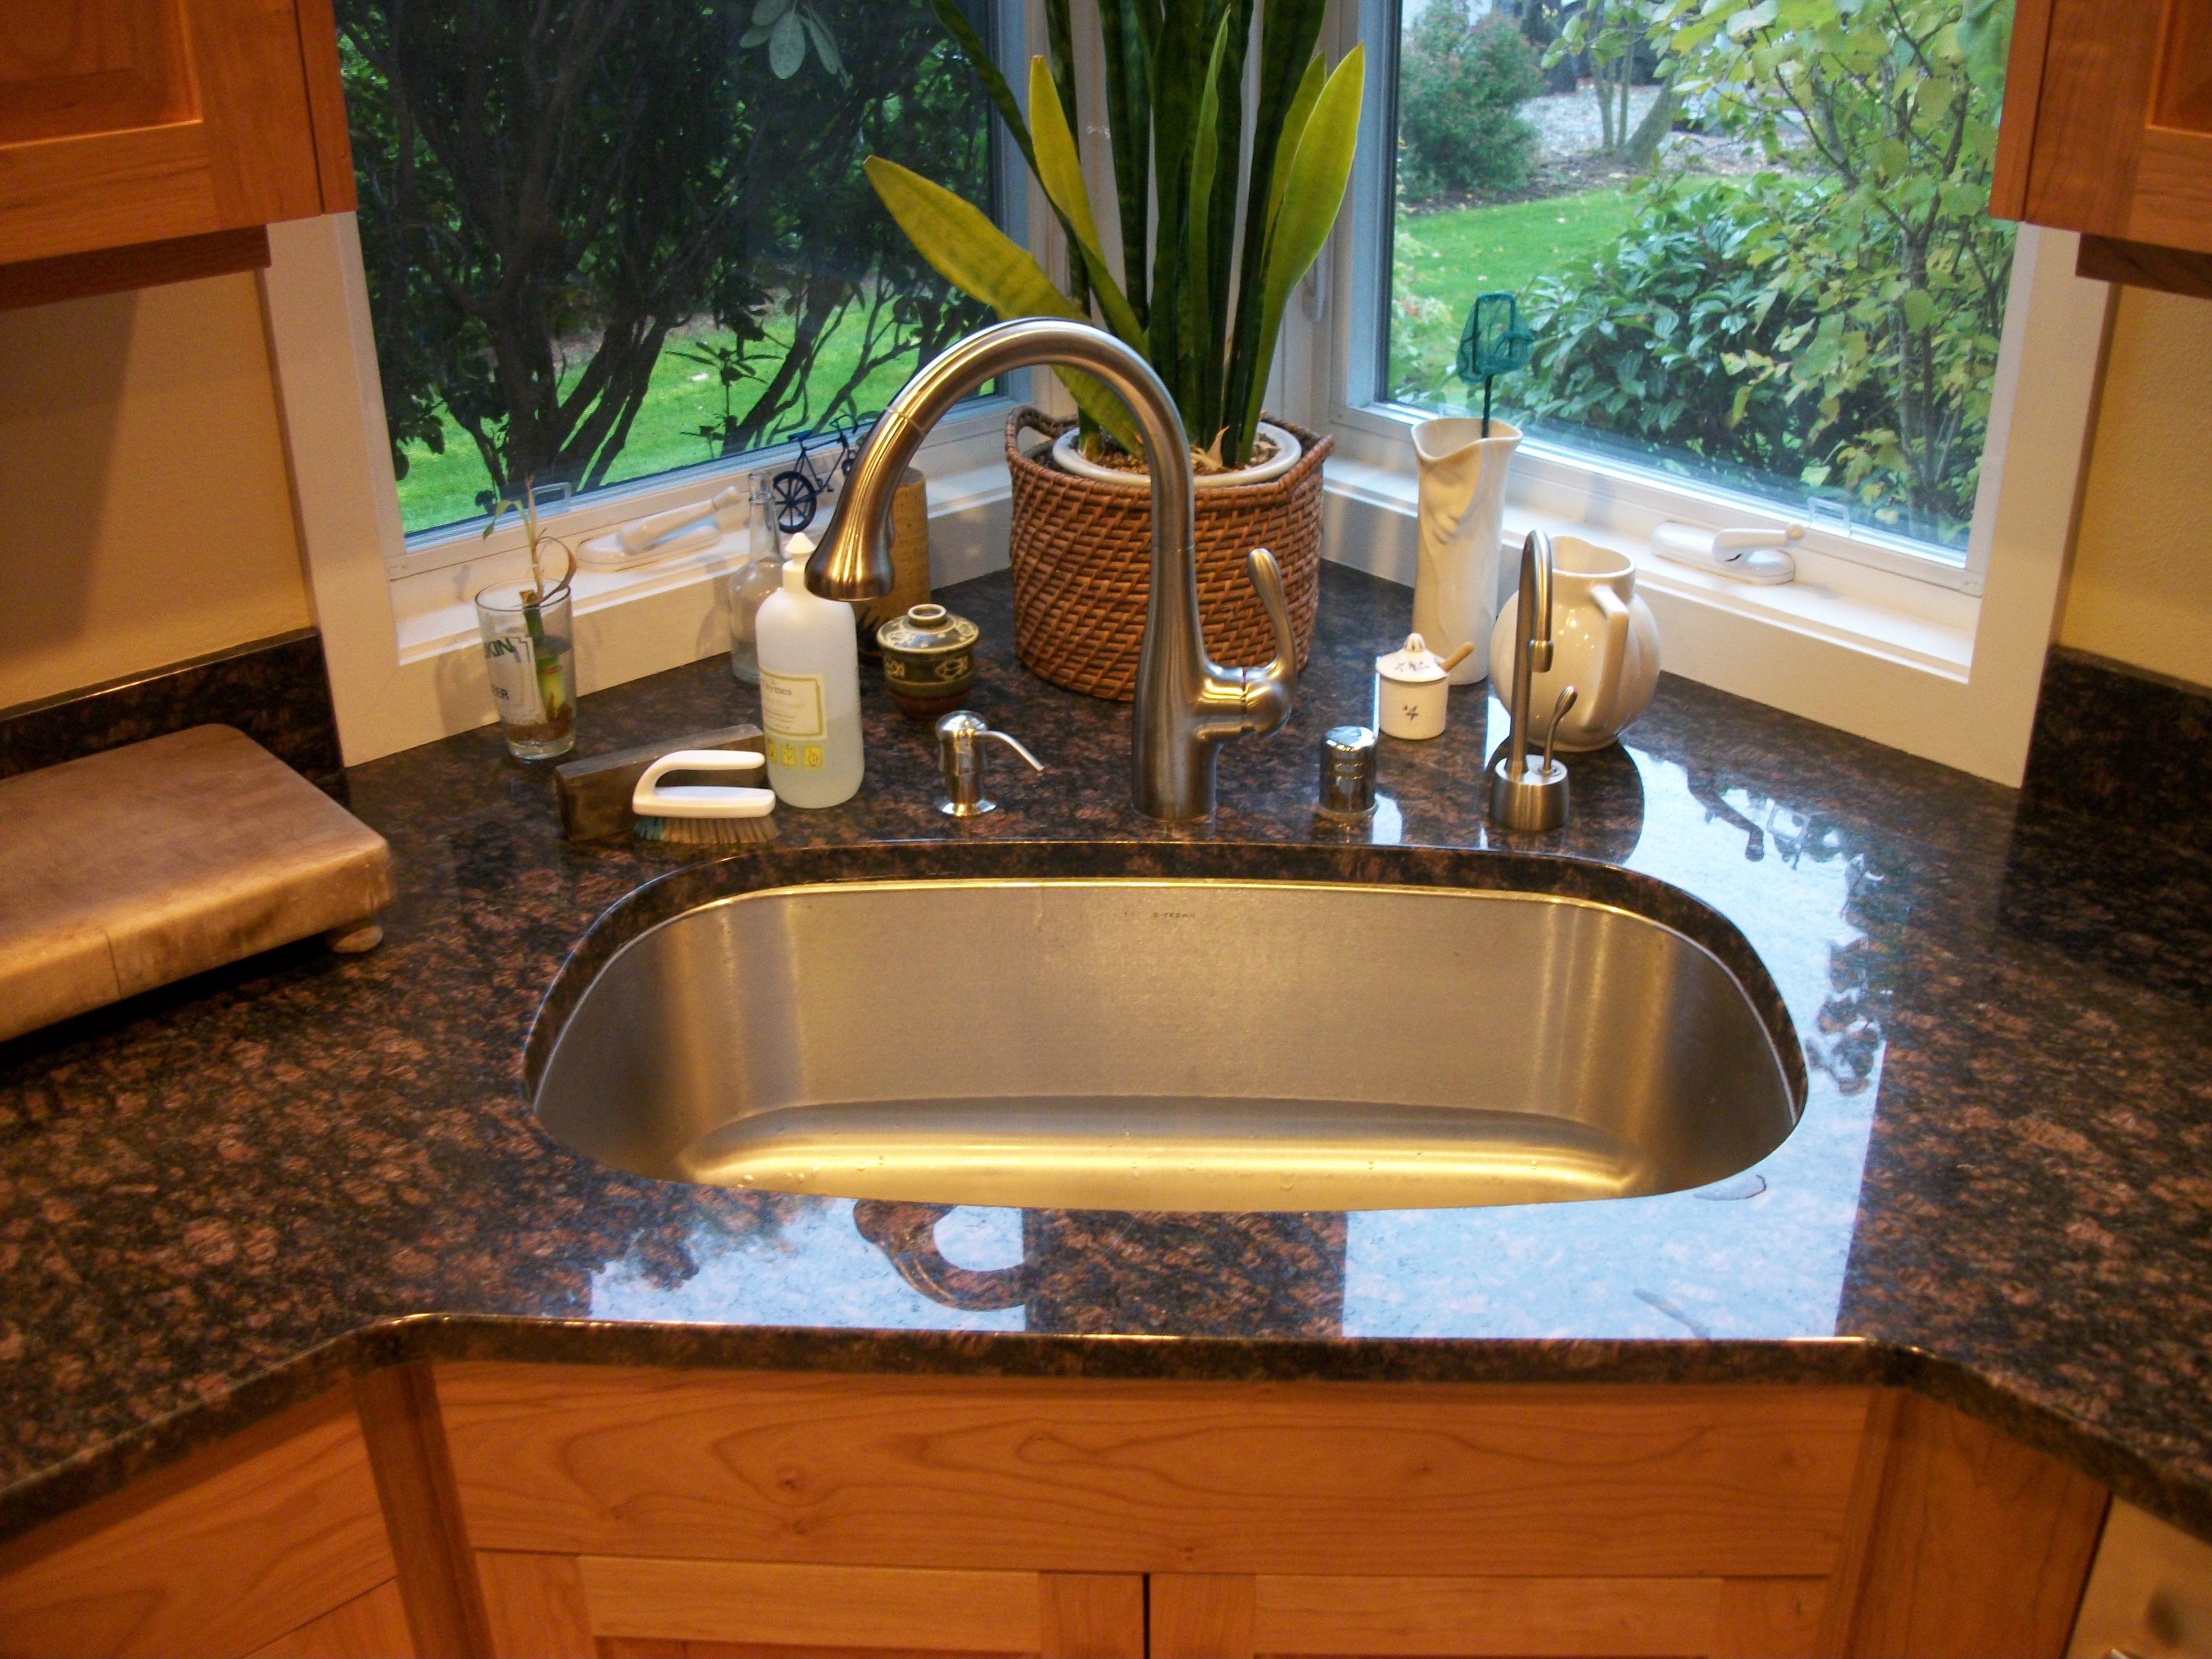 extended kitchen sink area